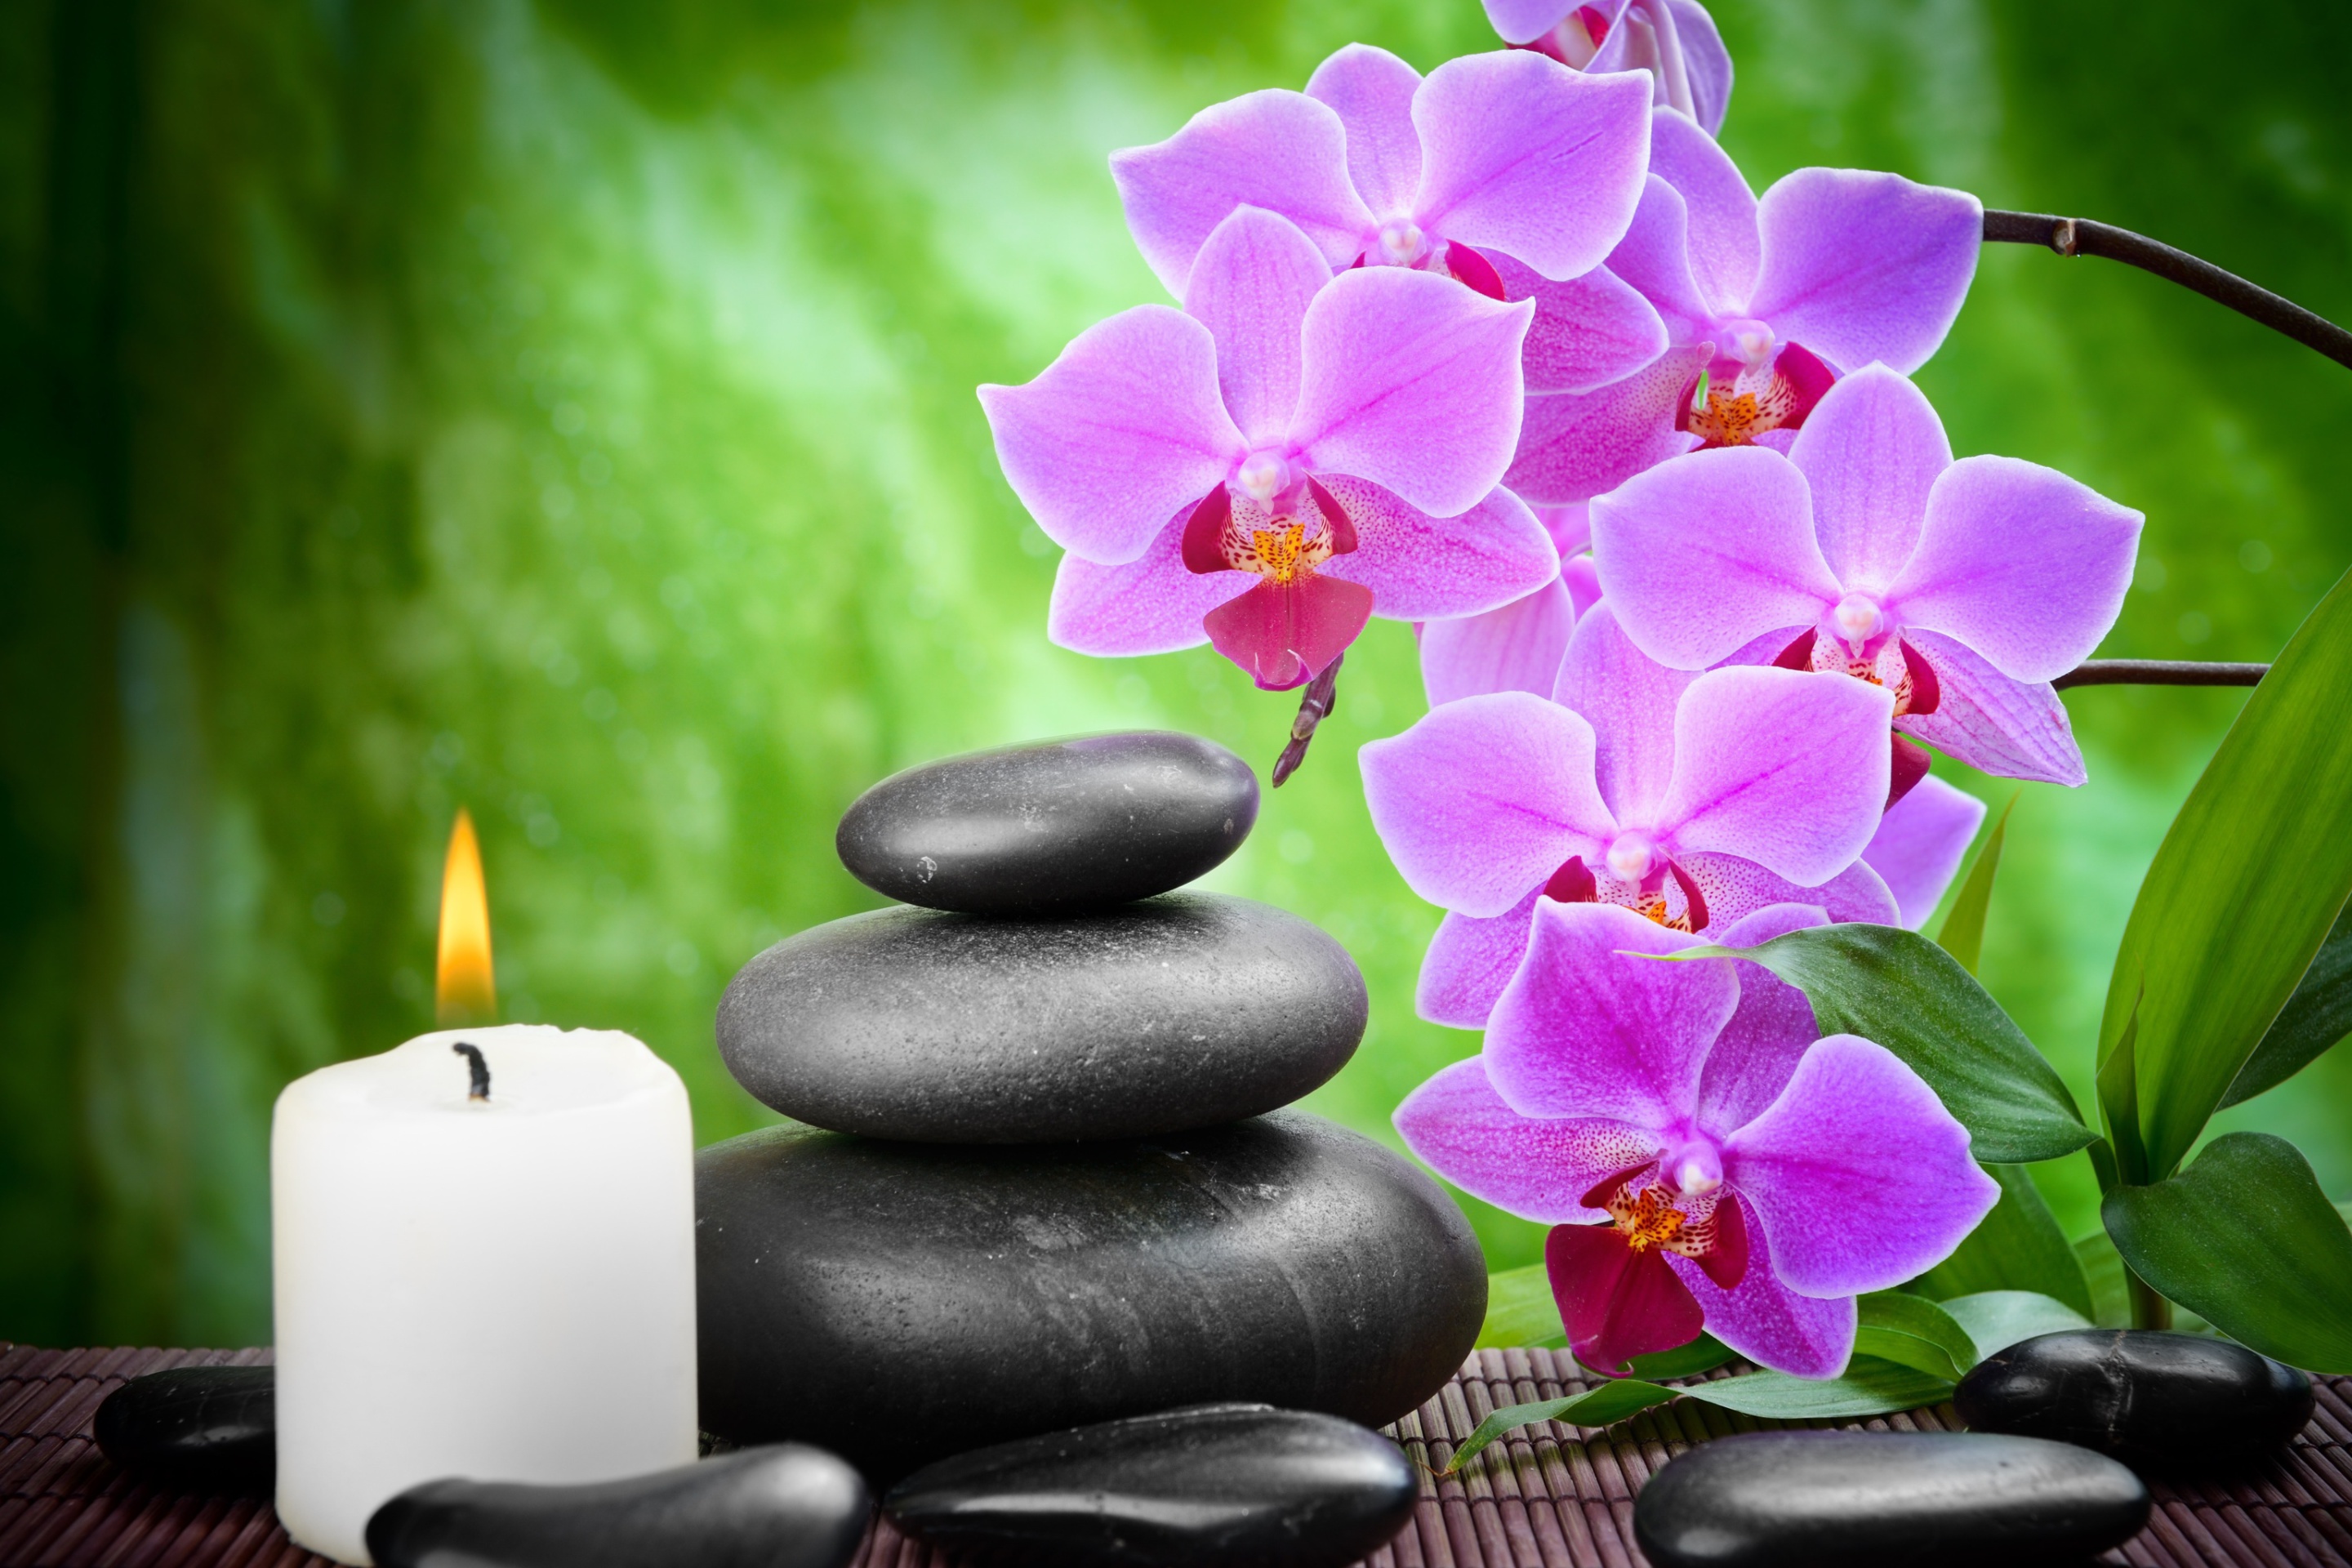 Pebbles, candles and orchids screenshot #1 2880x1920